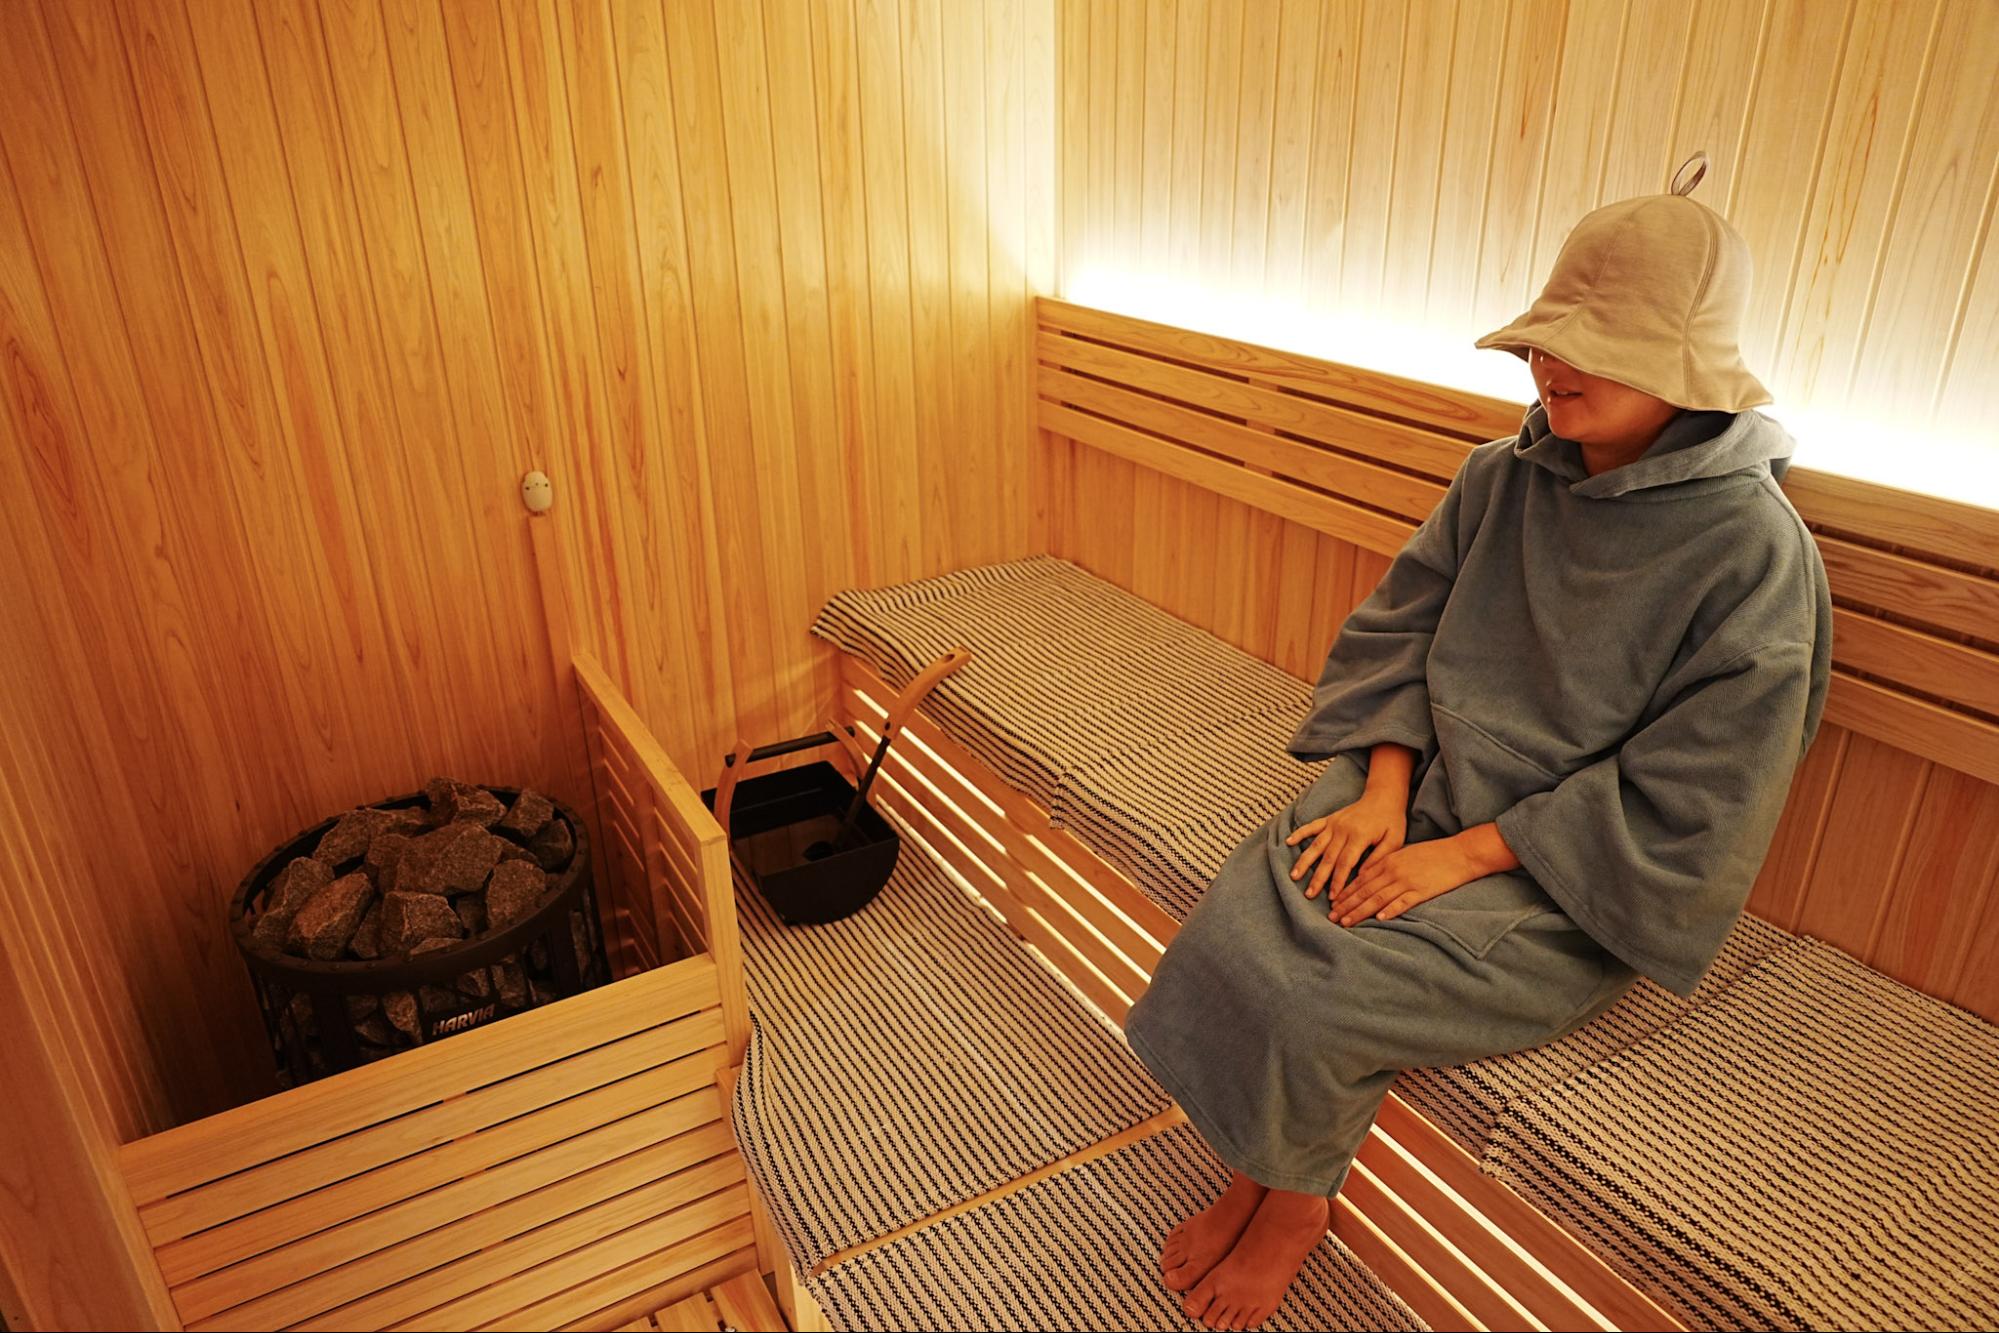 [Experience report] Travel gear brand TO & FRO's new series "Tou ~ Andofuro" makes bath and sauna life comfortable!